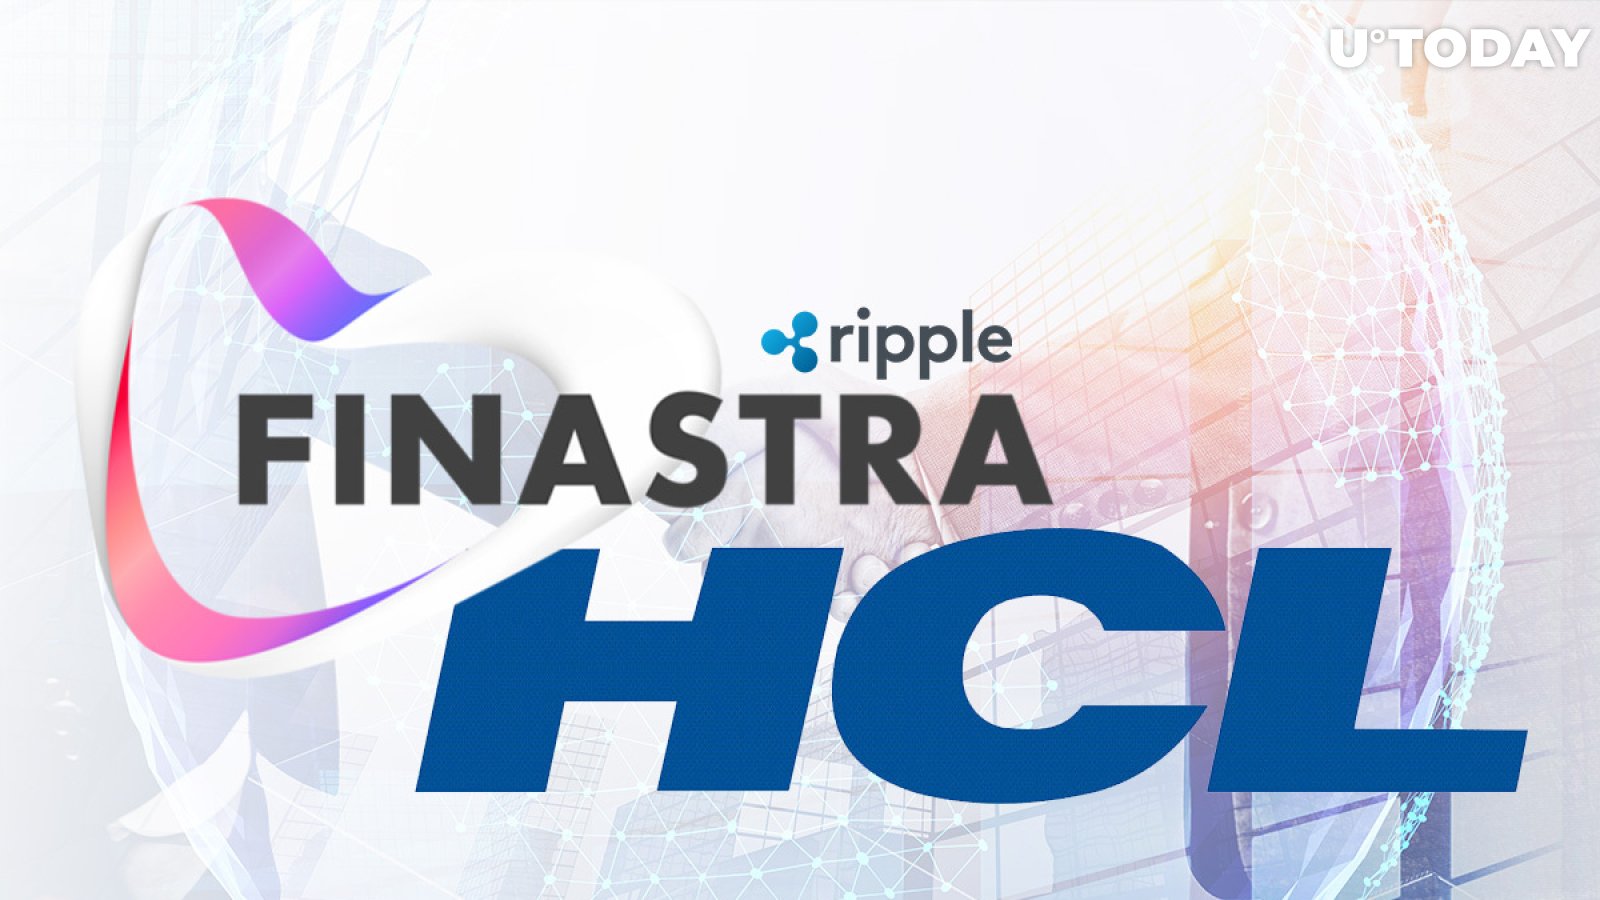 Ripple Client Finastra Partners with HCL Technologies Multinational IT Giant 